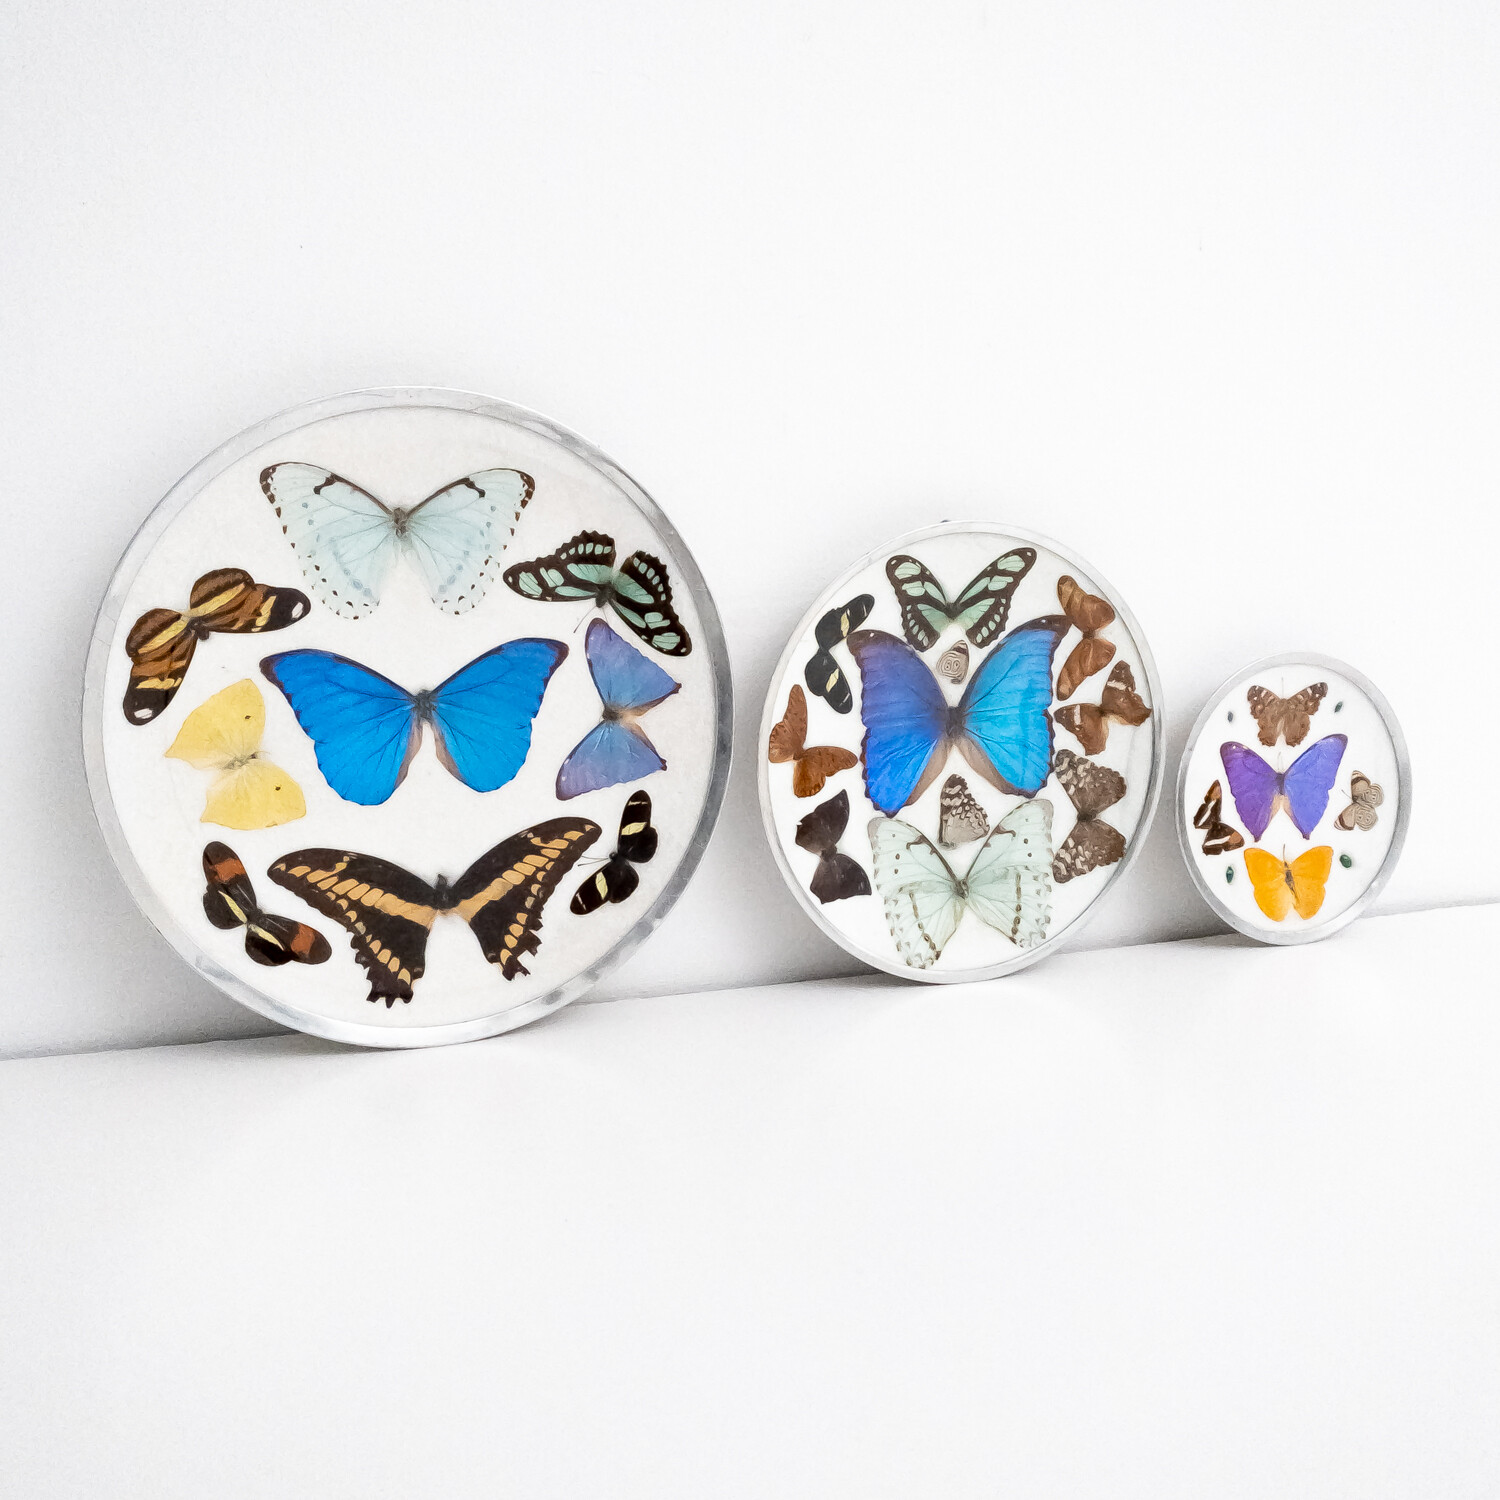 Set of 3 decorative plates from the stuffed butterflies collection